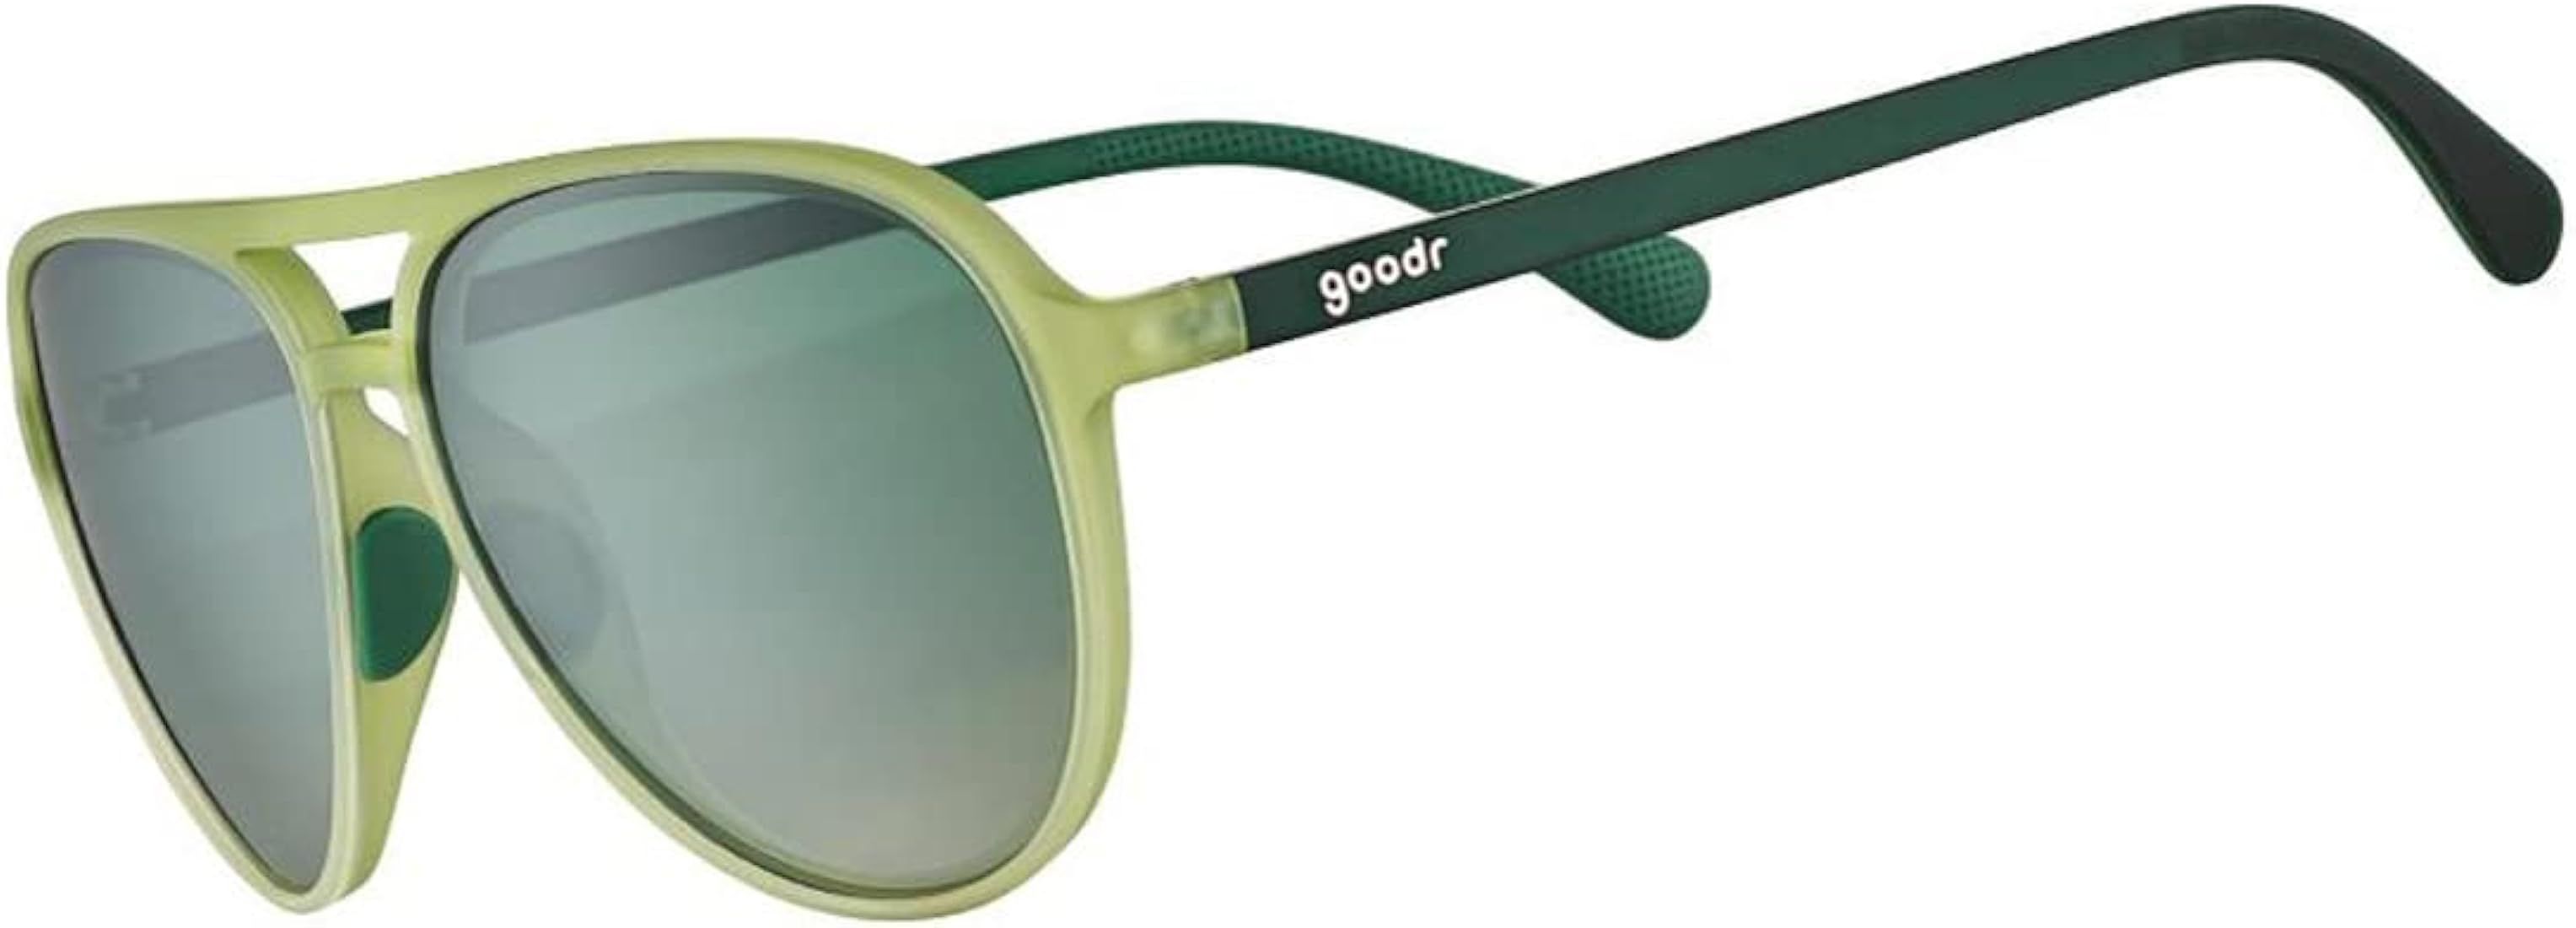 Goodr Buzzed on the Tower sunglasses | Amazon (US)